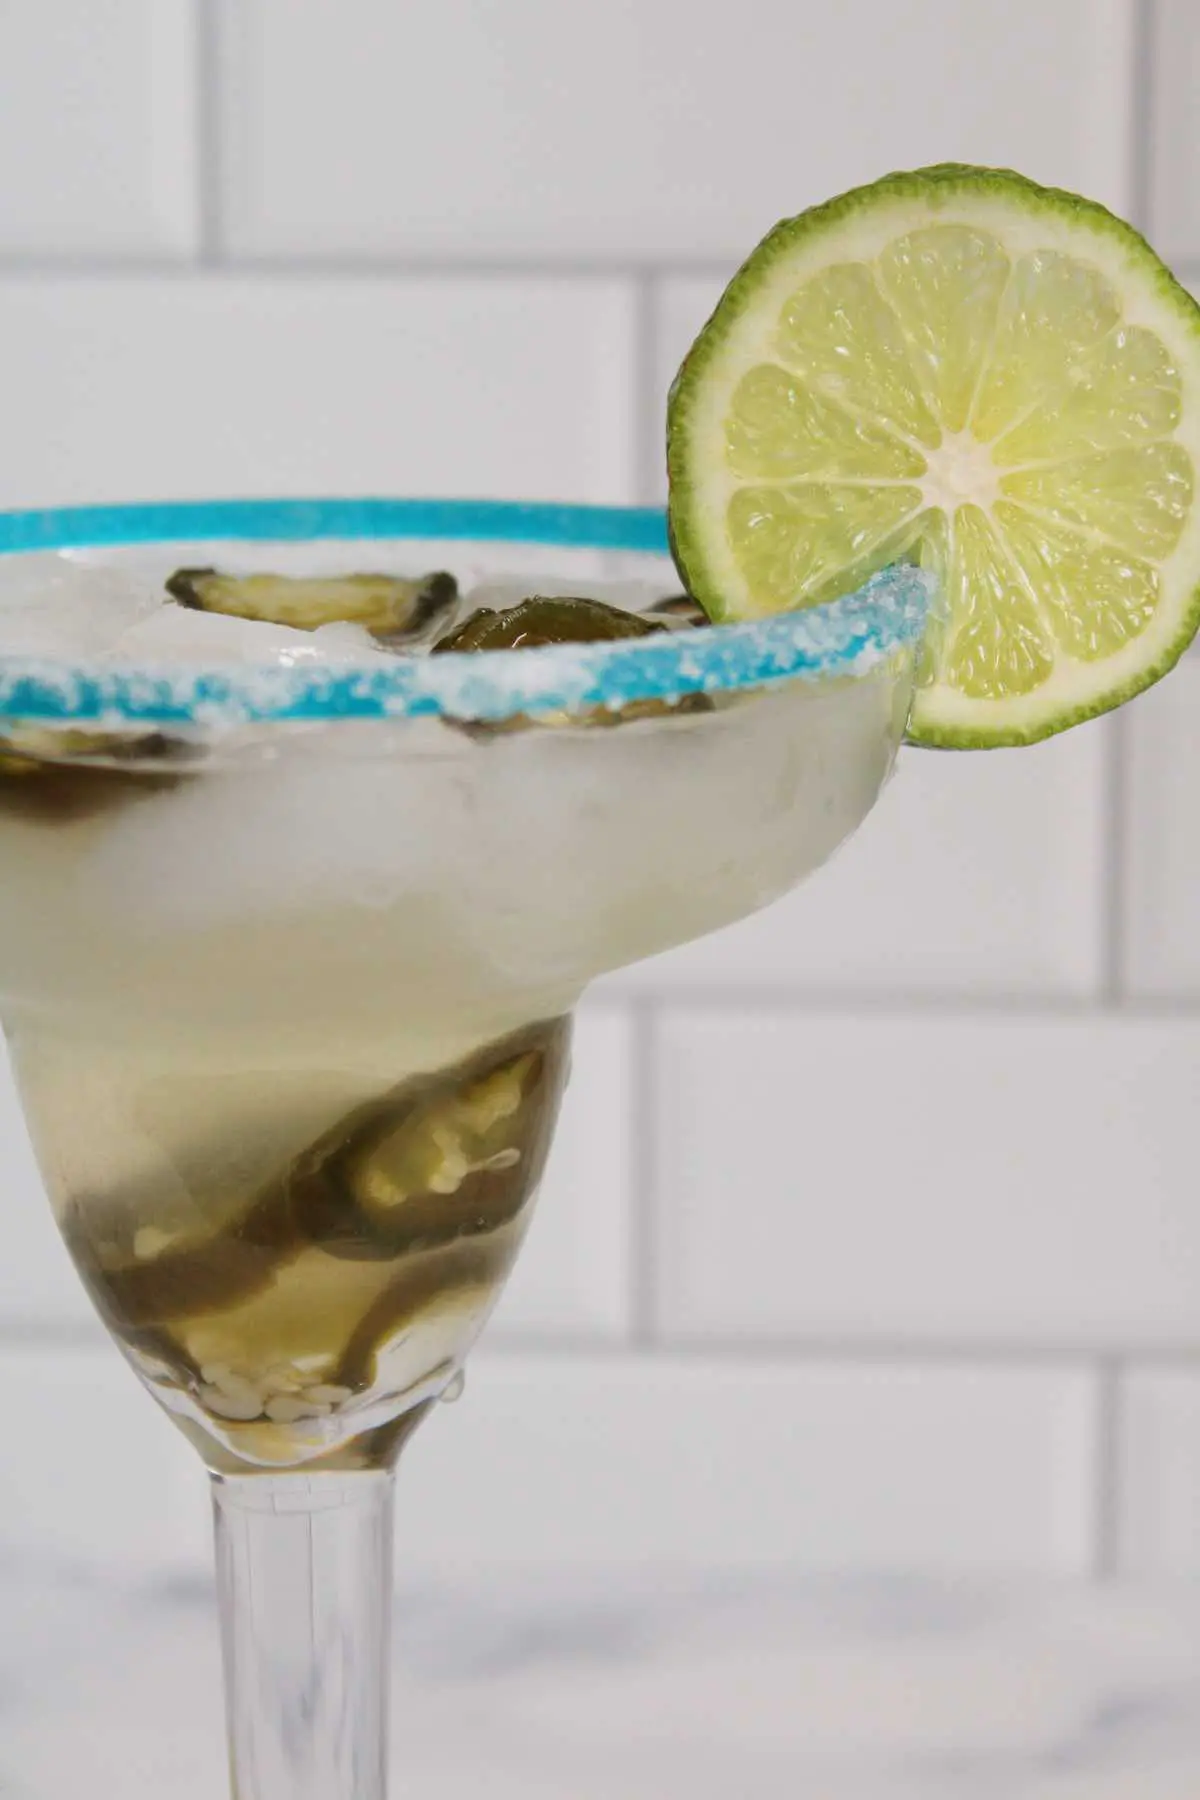 An easy recipe for spicy jalapeno margaritas made with homemade jalapeno simple syrup.